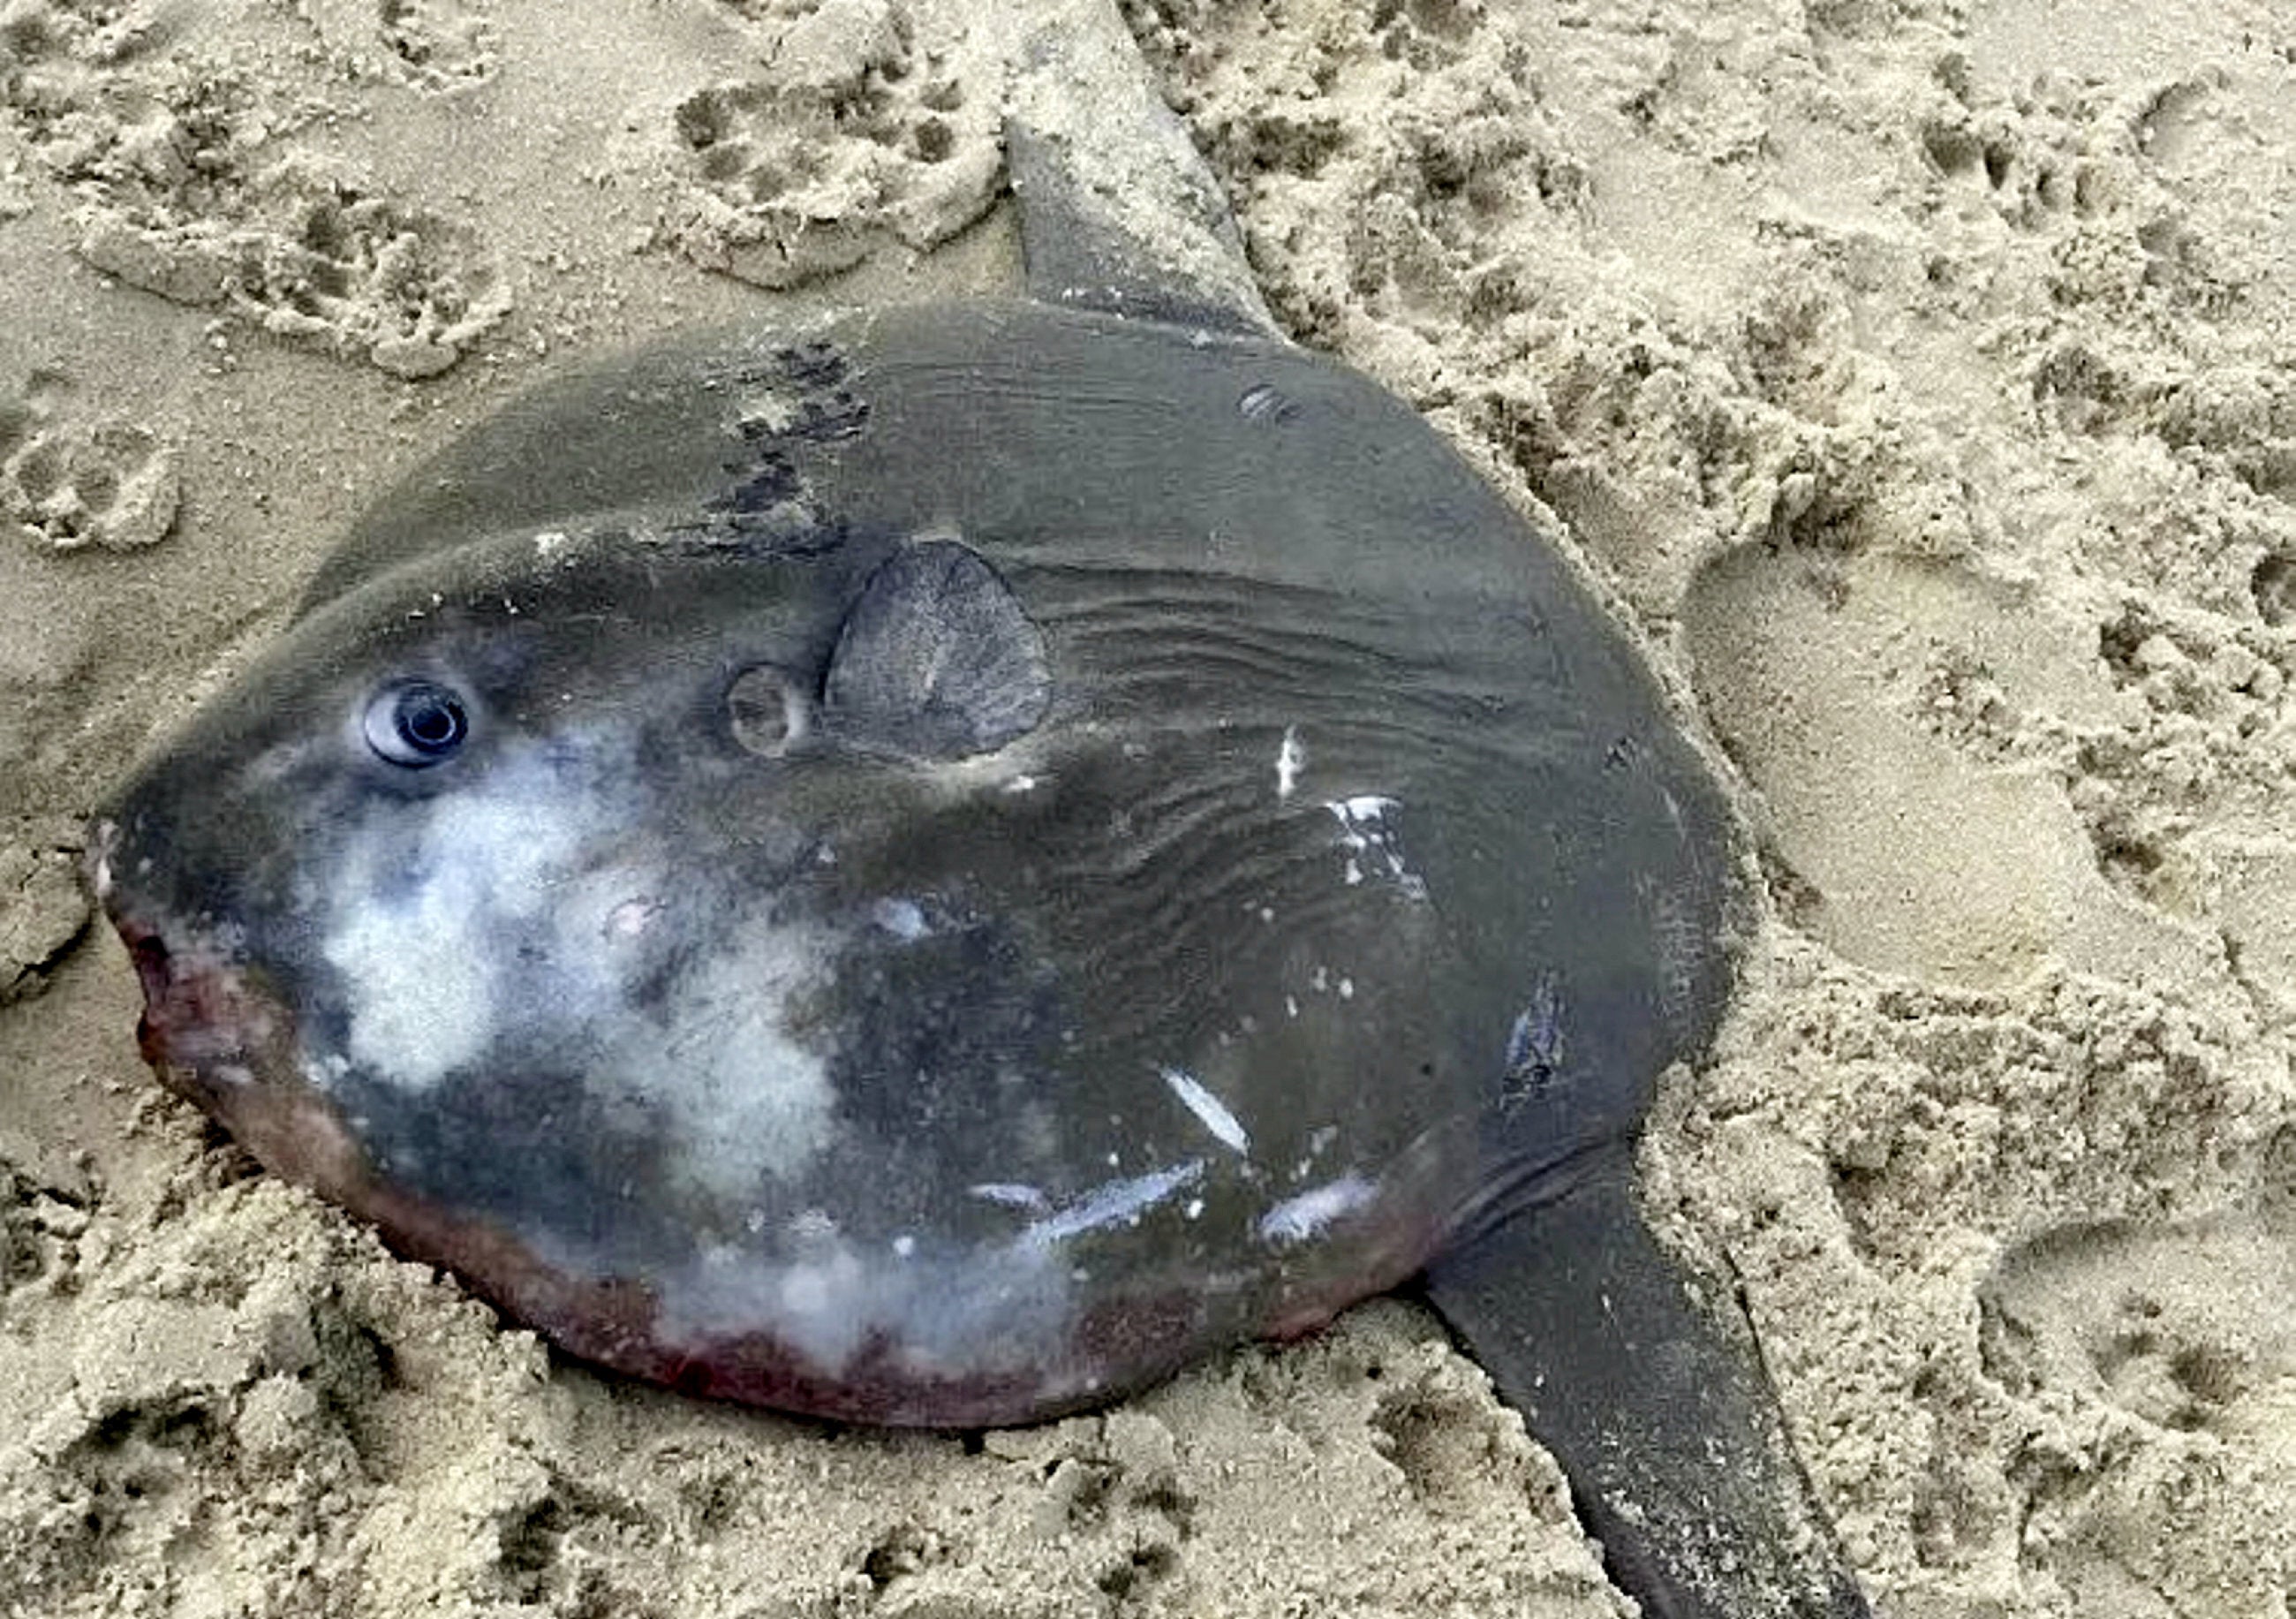 A rare fish more at home in tropical waters has washed up on a beach in Great Yarmouth